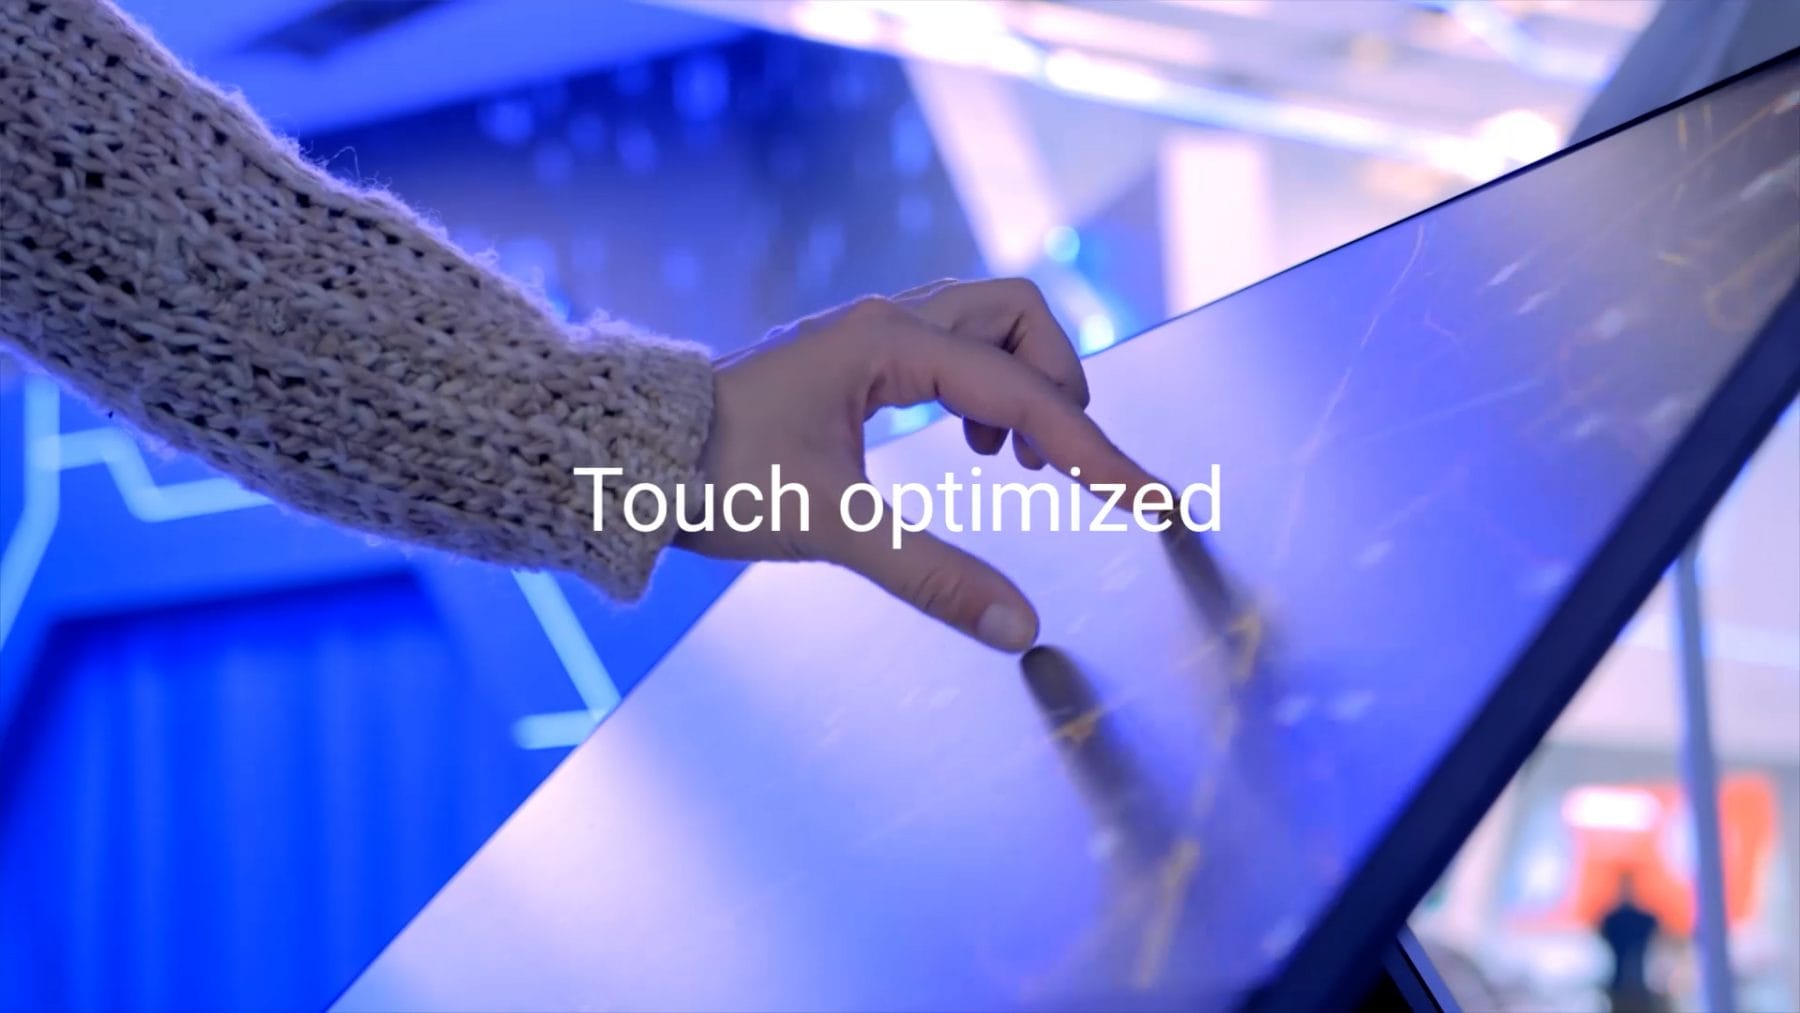 Simply Interactive Presentation Solution - Touch optimized